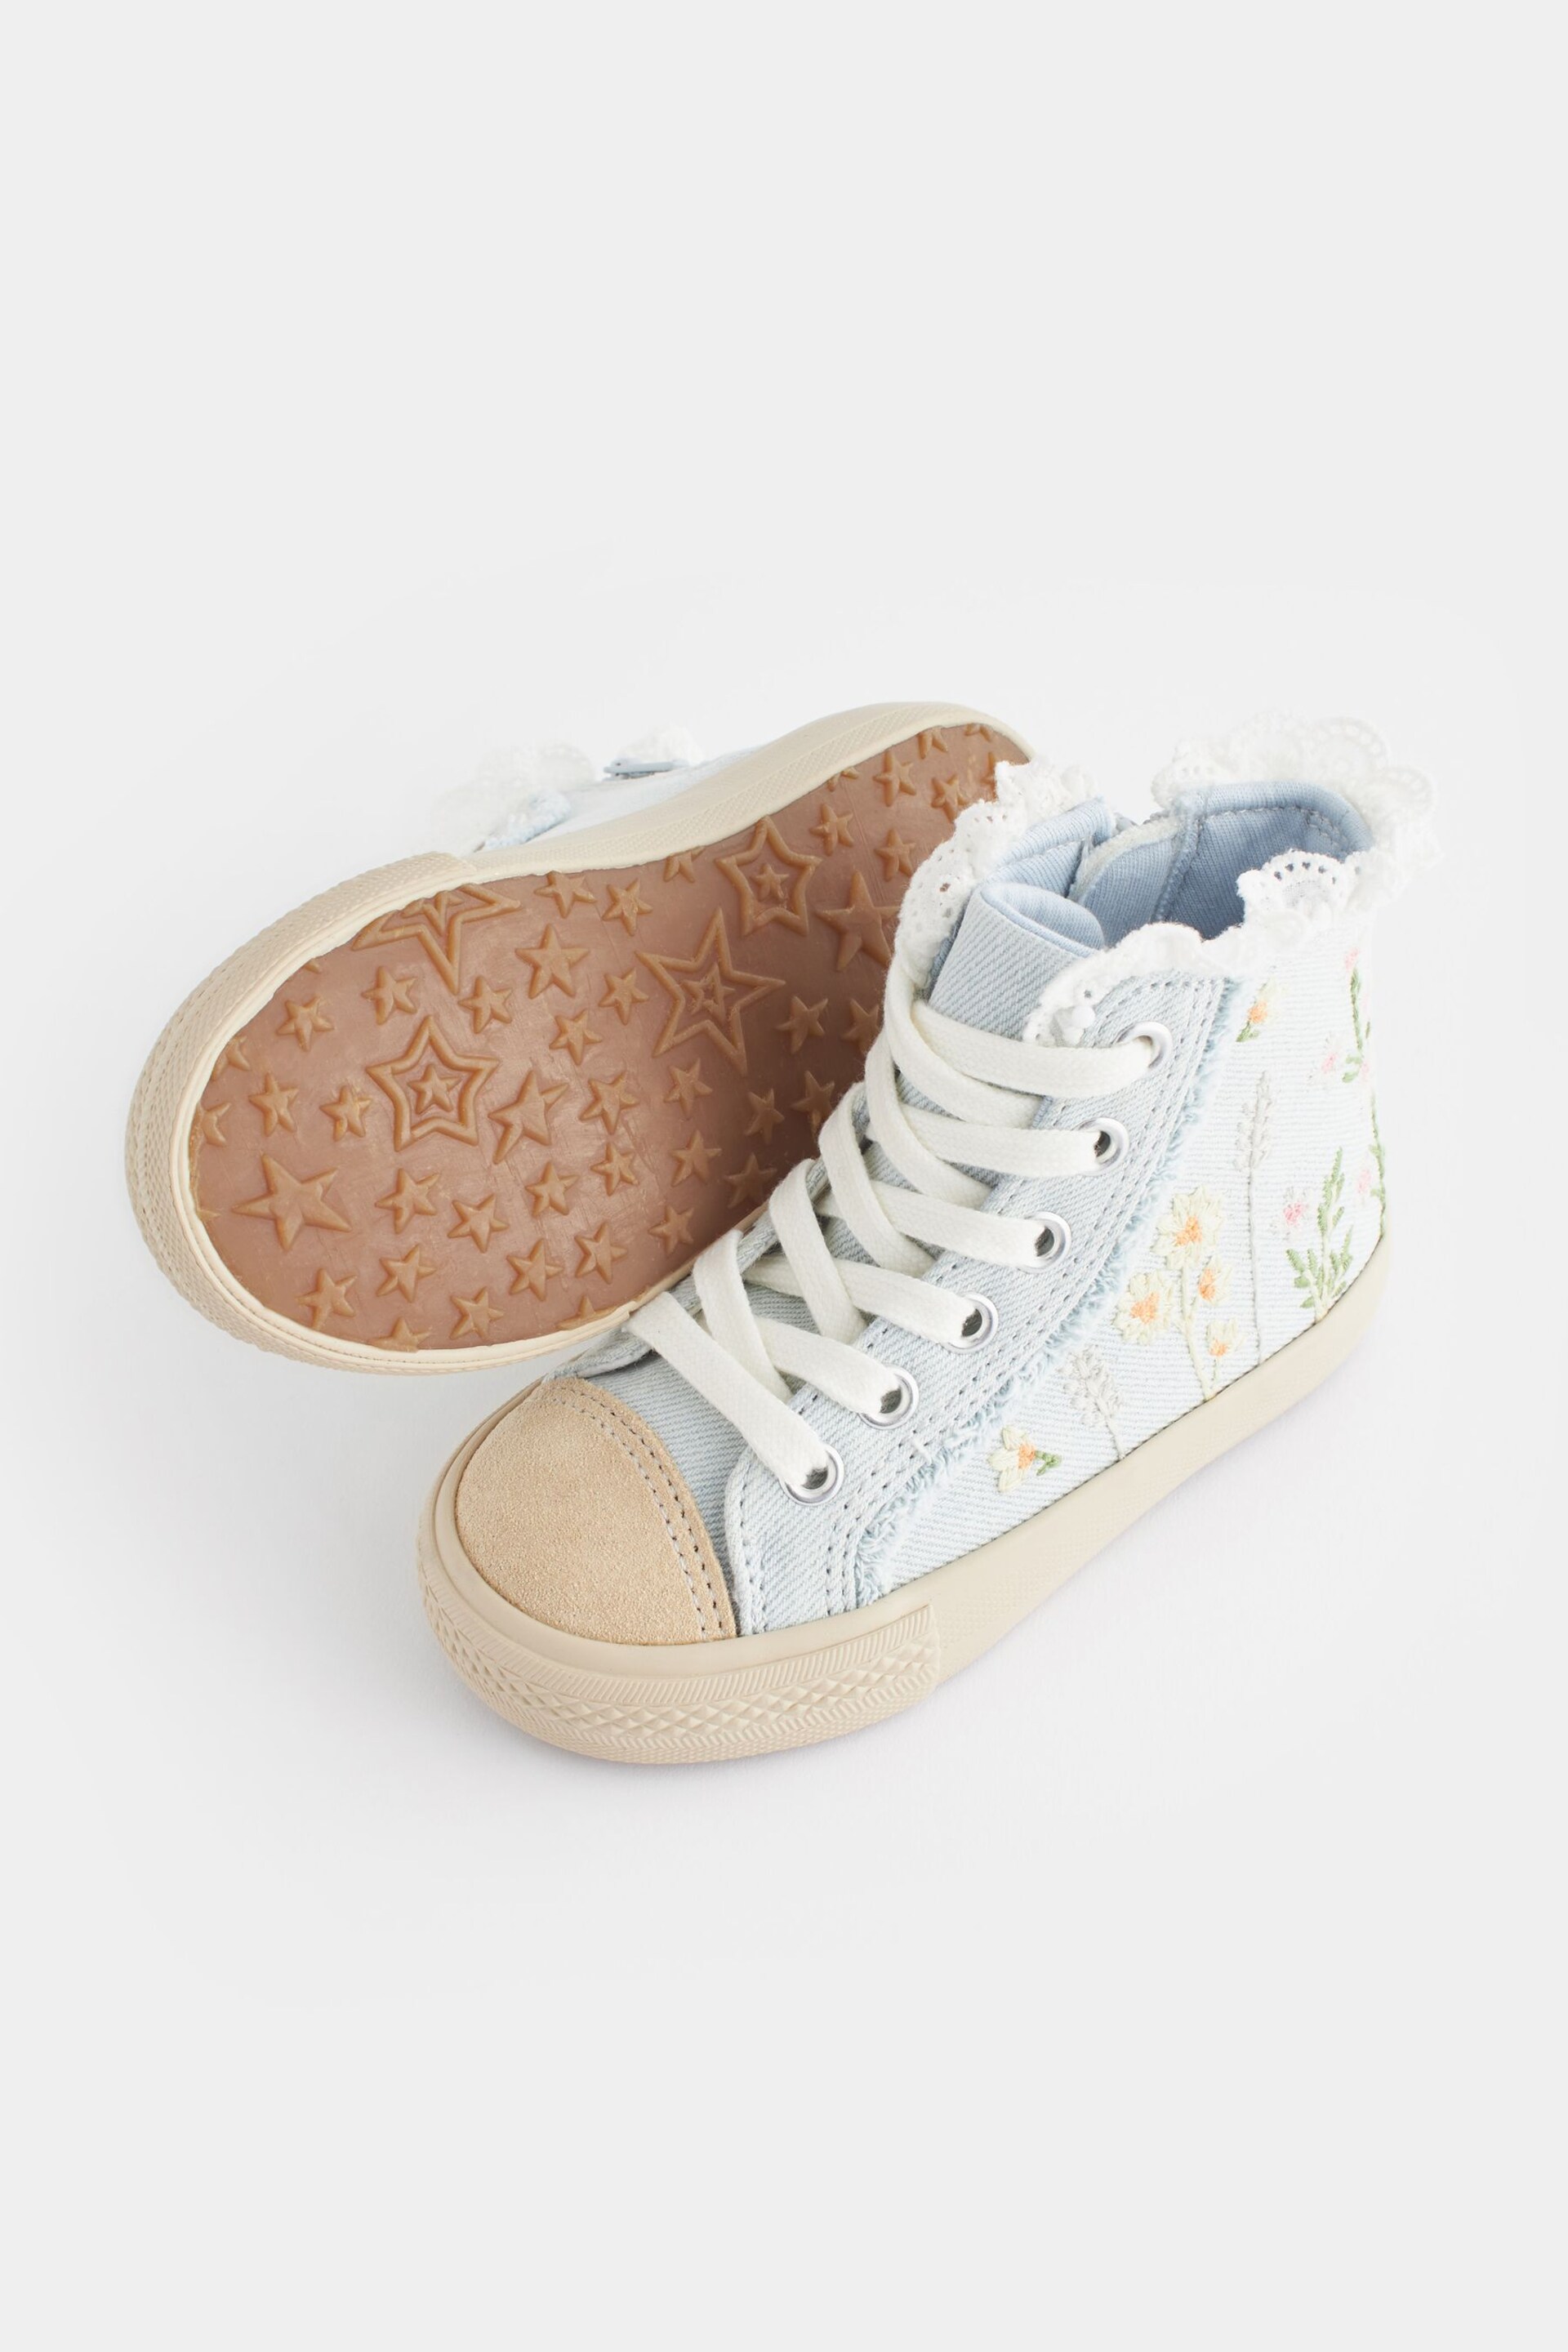 Denim Blue Embroidered High Top Trainers - Image 4 of 7